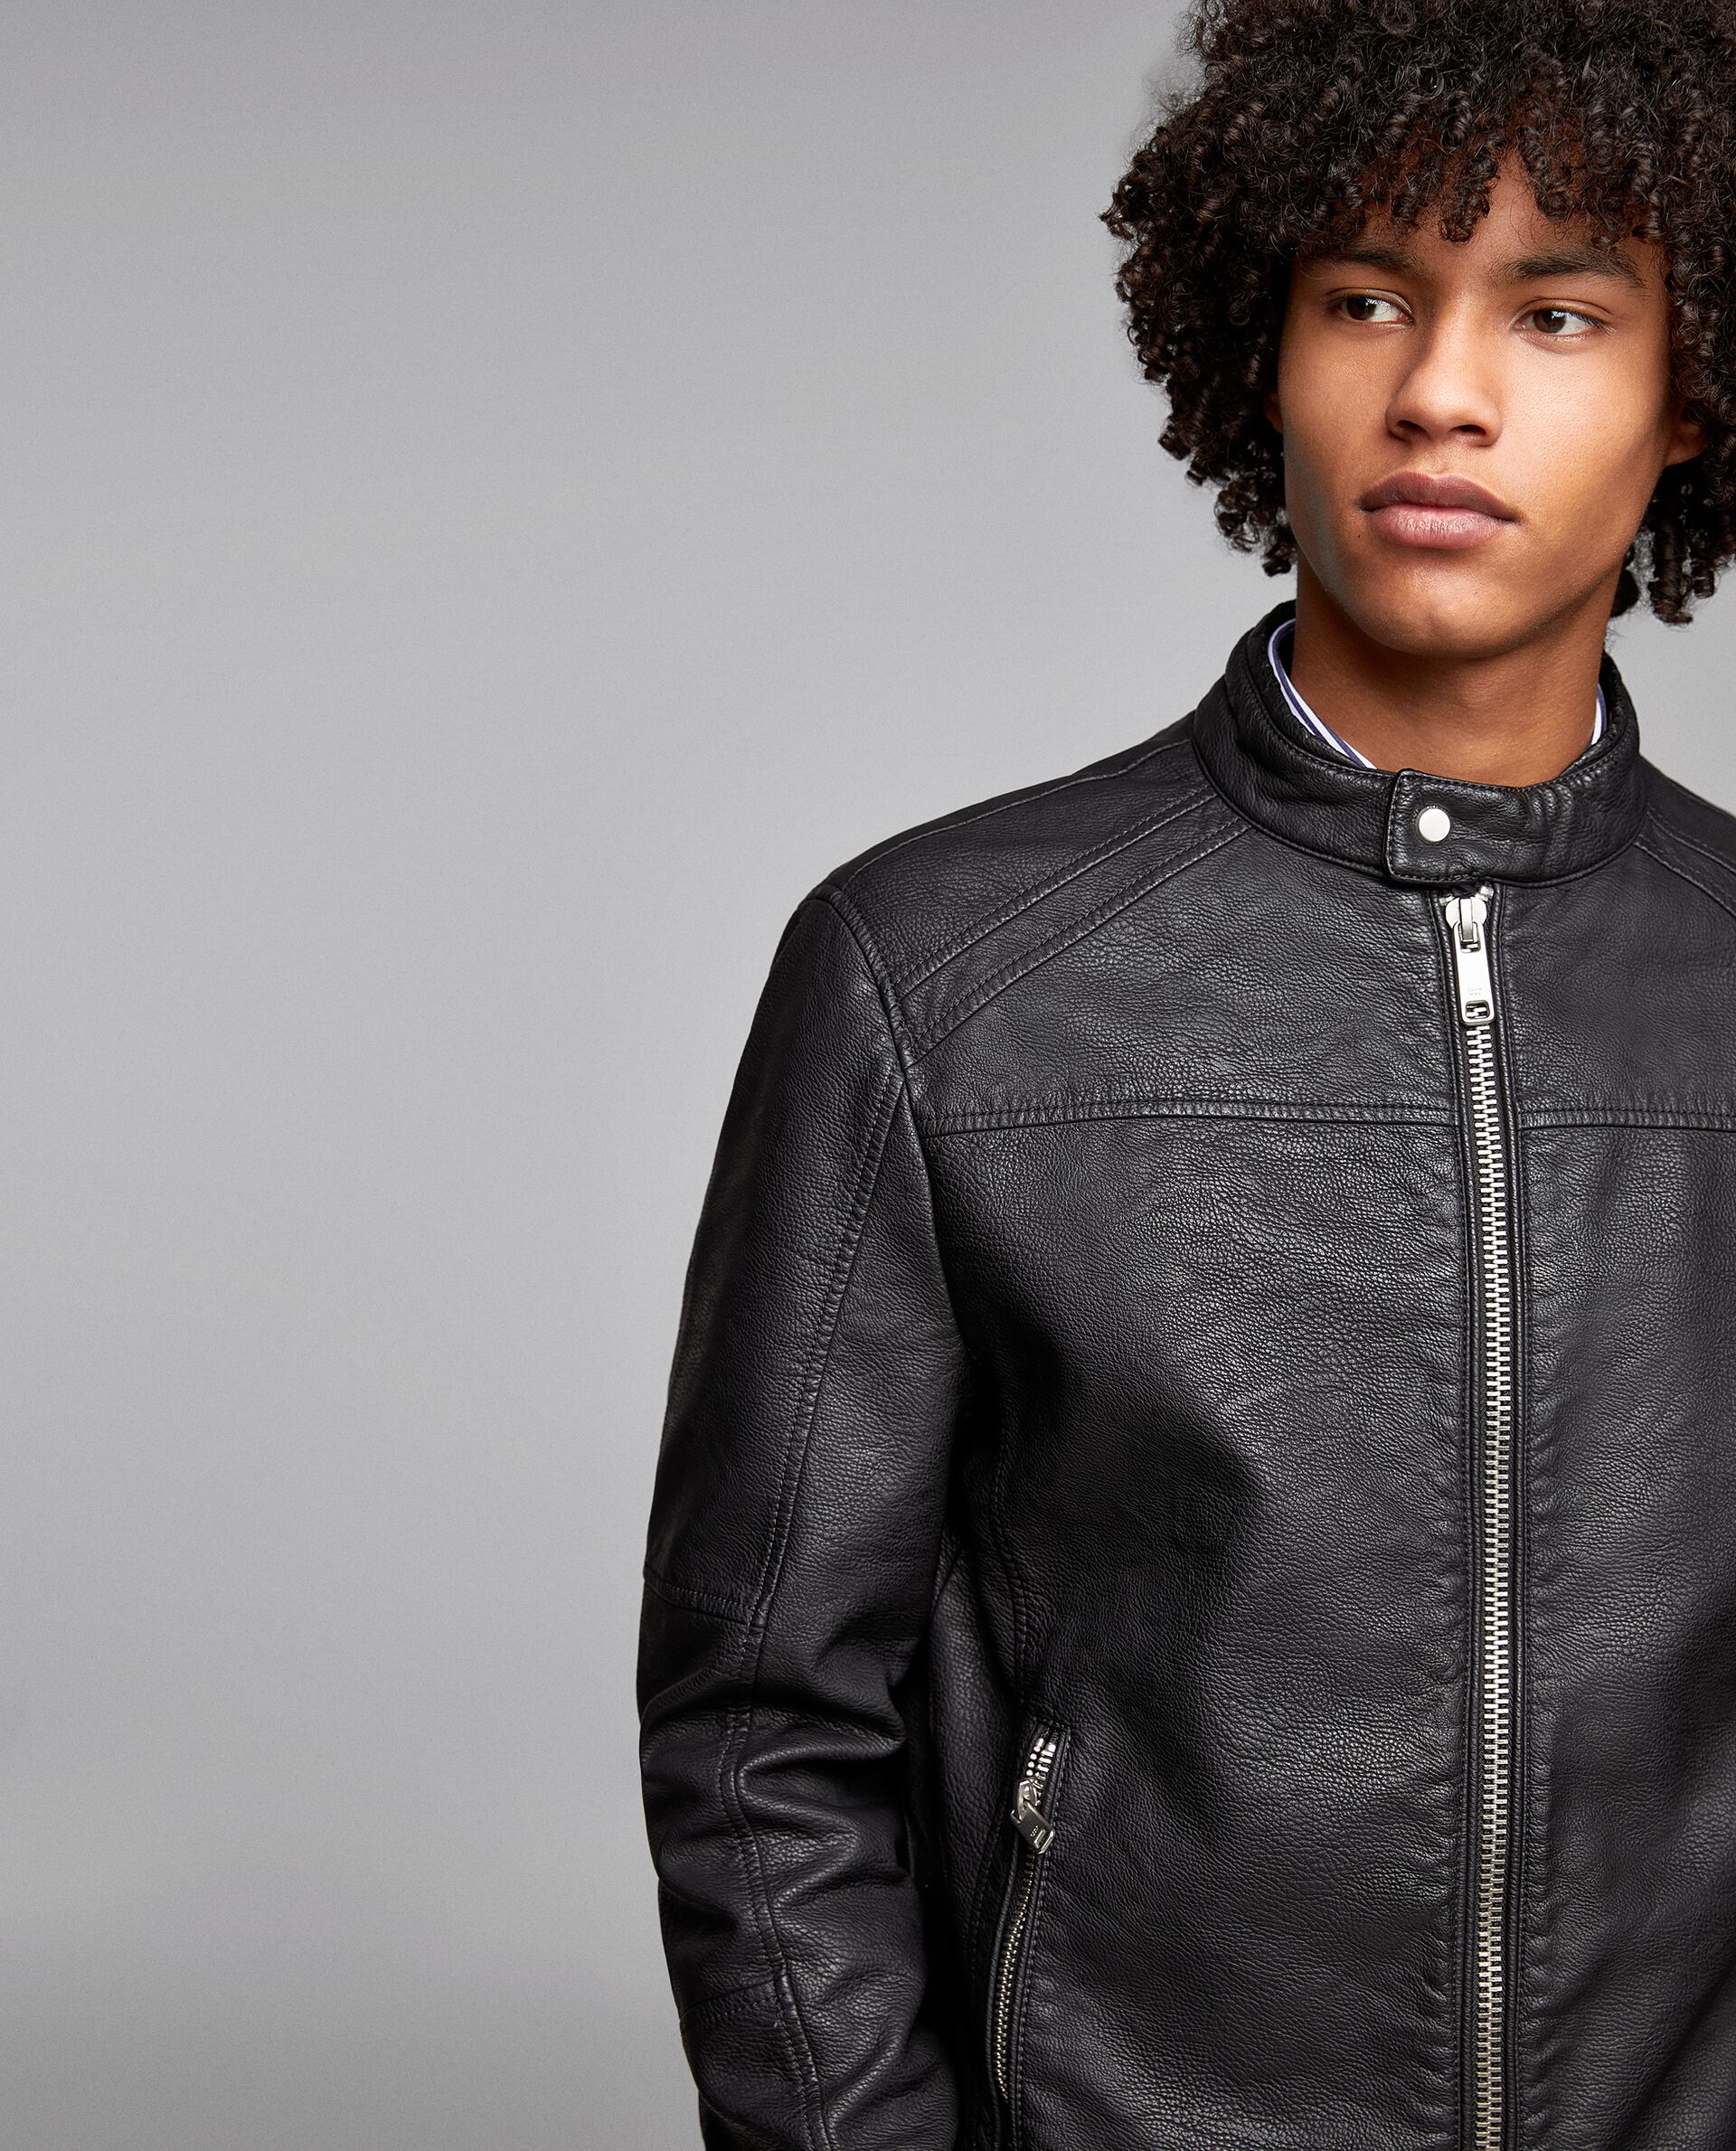 Zara LEATHER EFFECT JACKET at £19.99 | love the brands